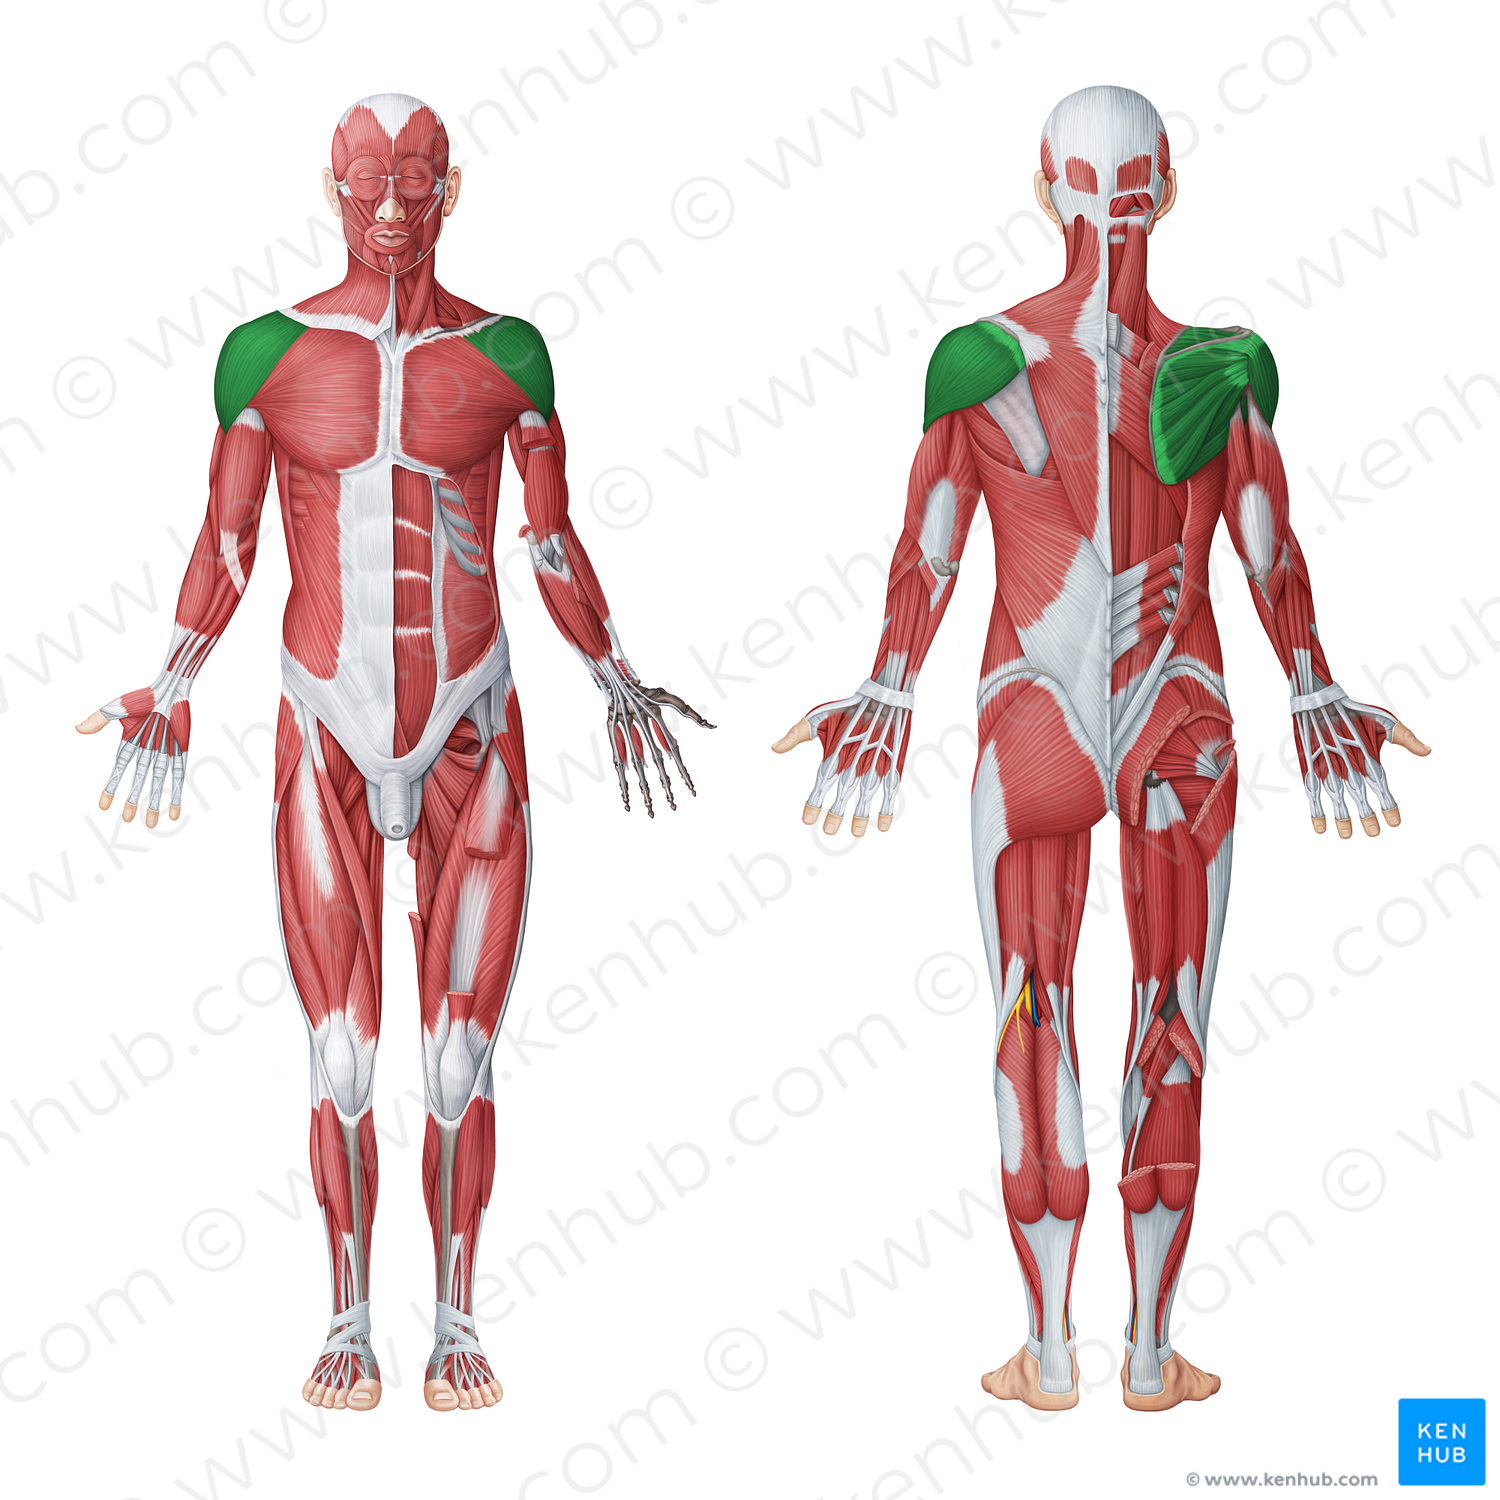 Scapulohumeral muscles (#20048)